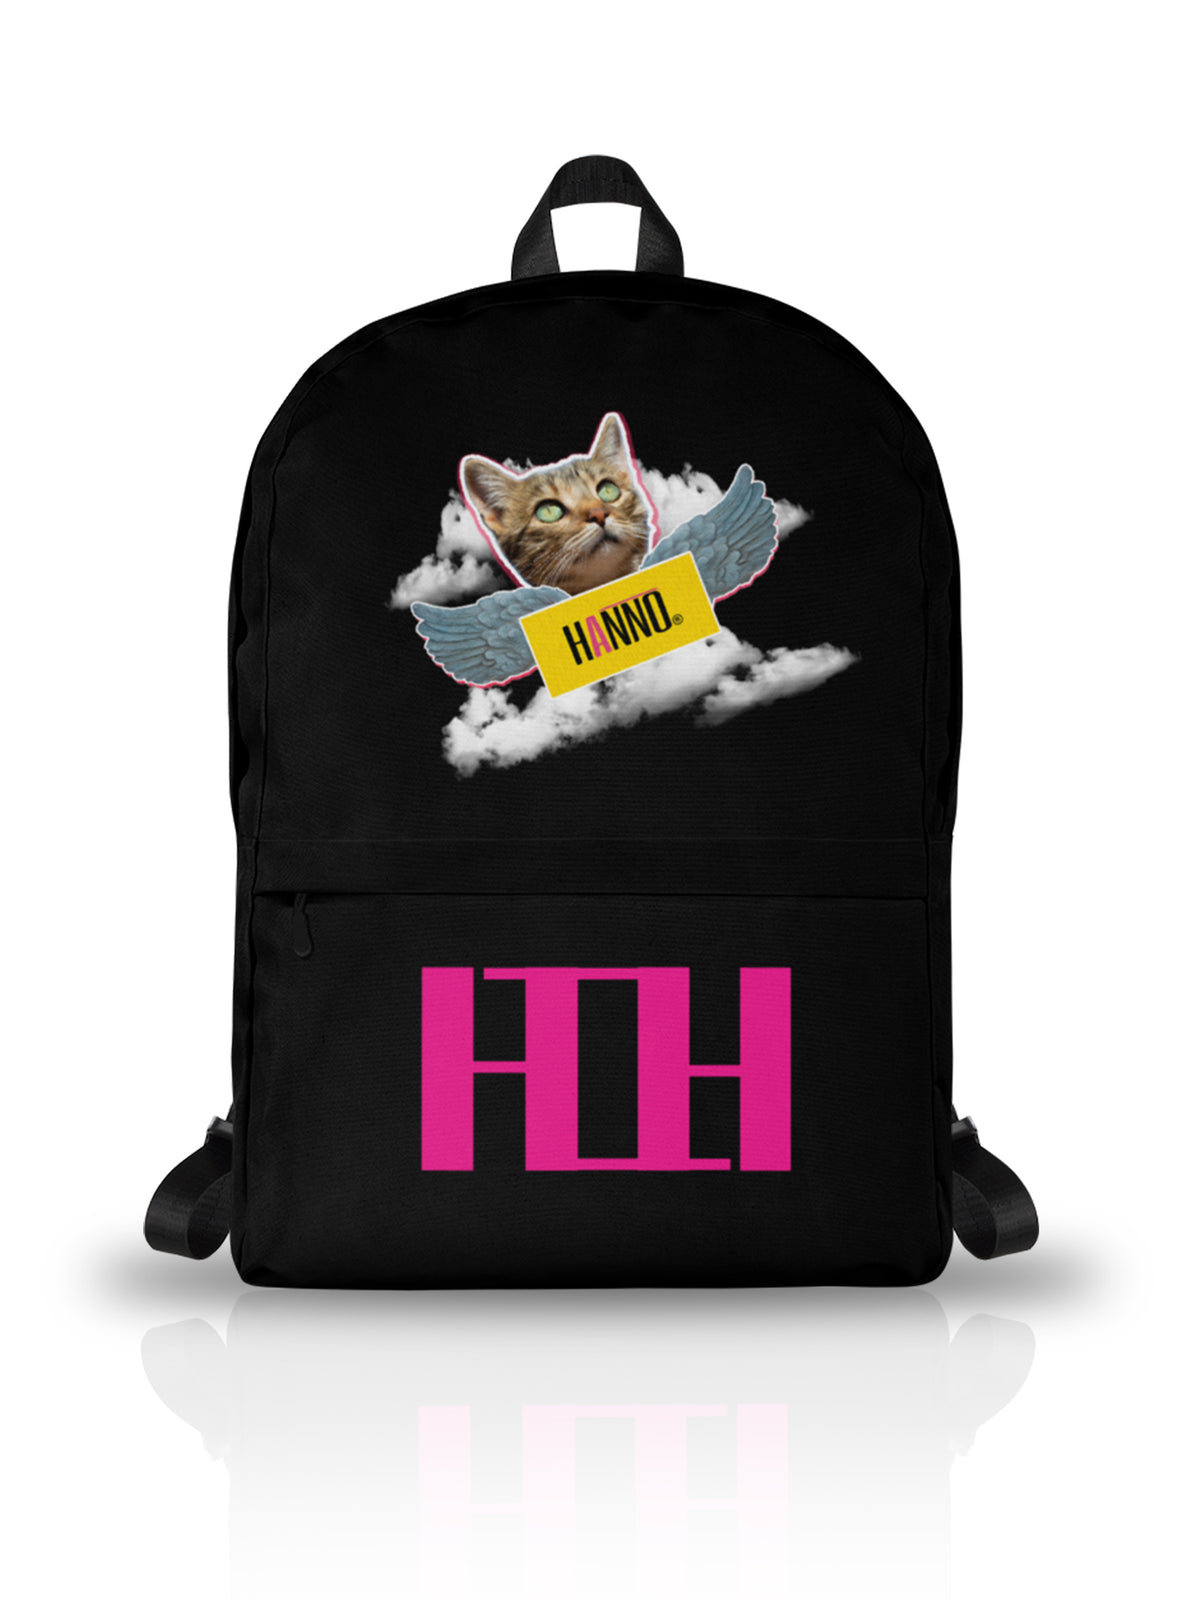 Black back pack with a cat angel printed 